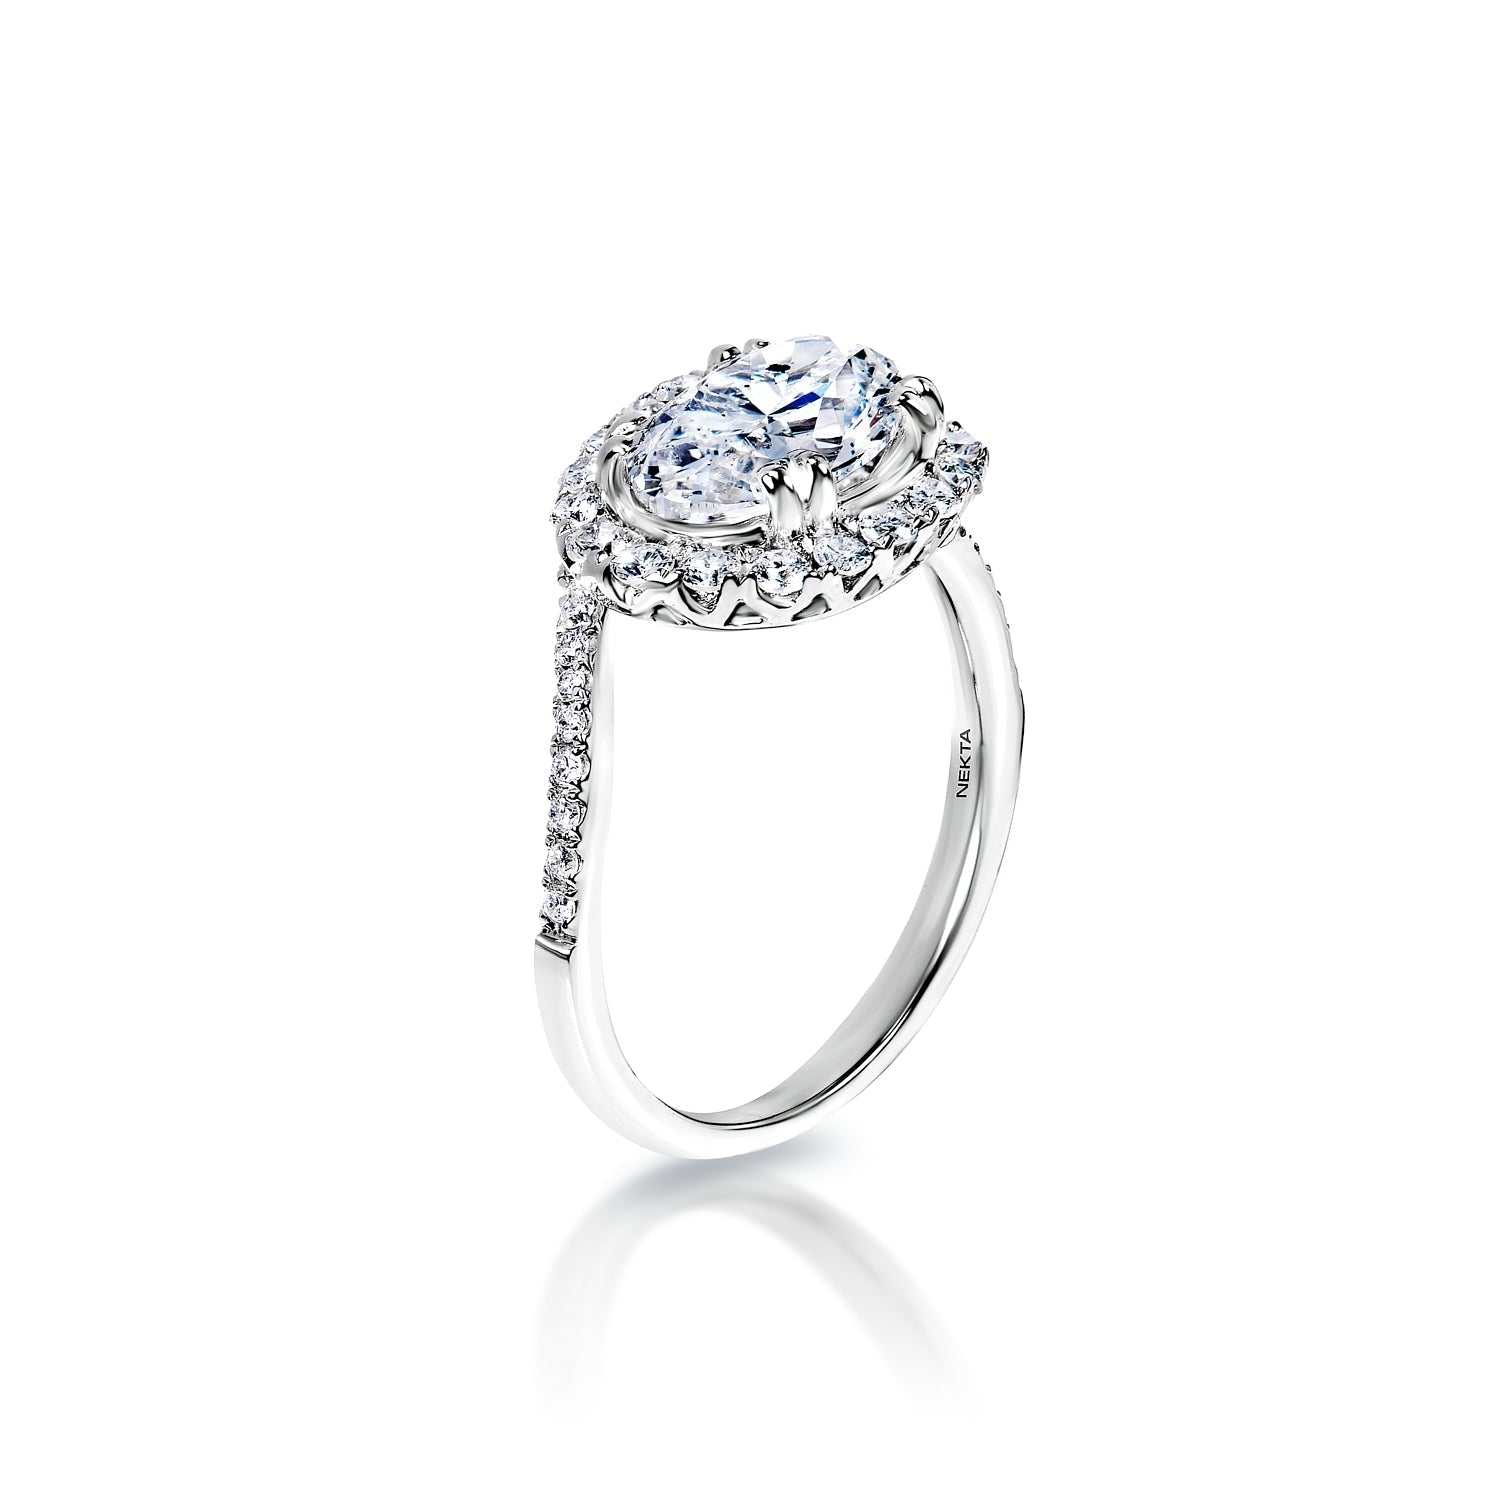 Ophelia 3 Carat Oval Cut Halo Diamond Engagement Ring in 14k White Gold Side View